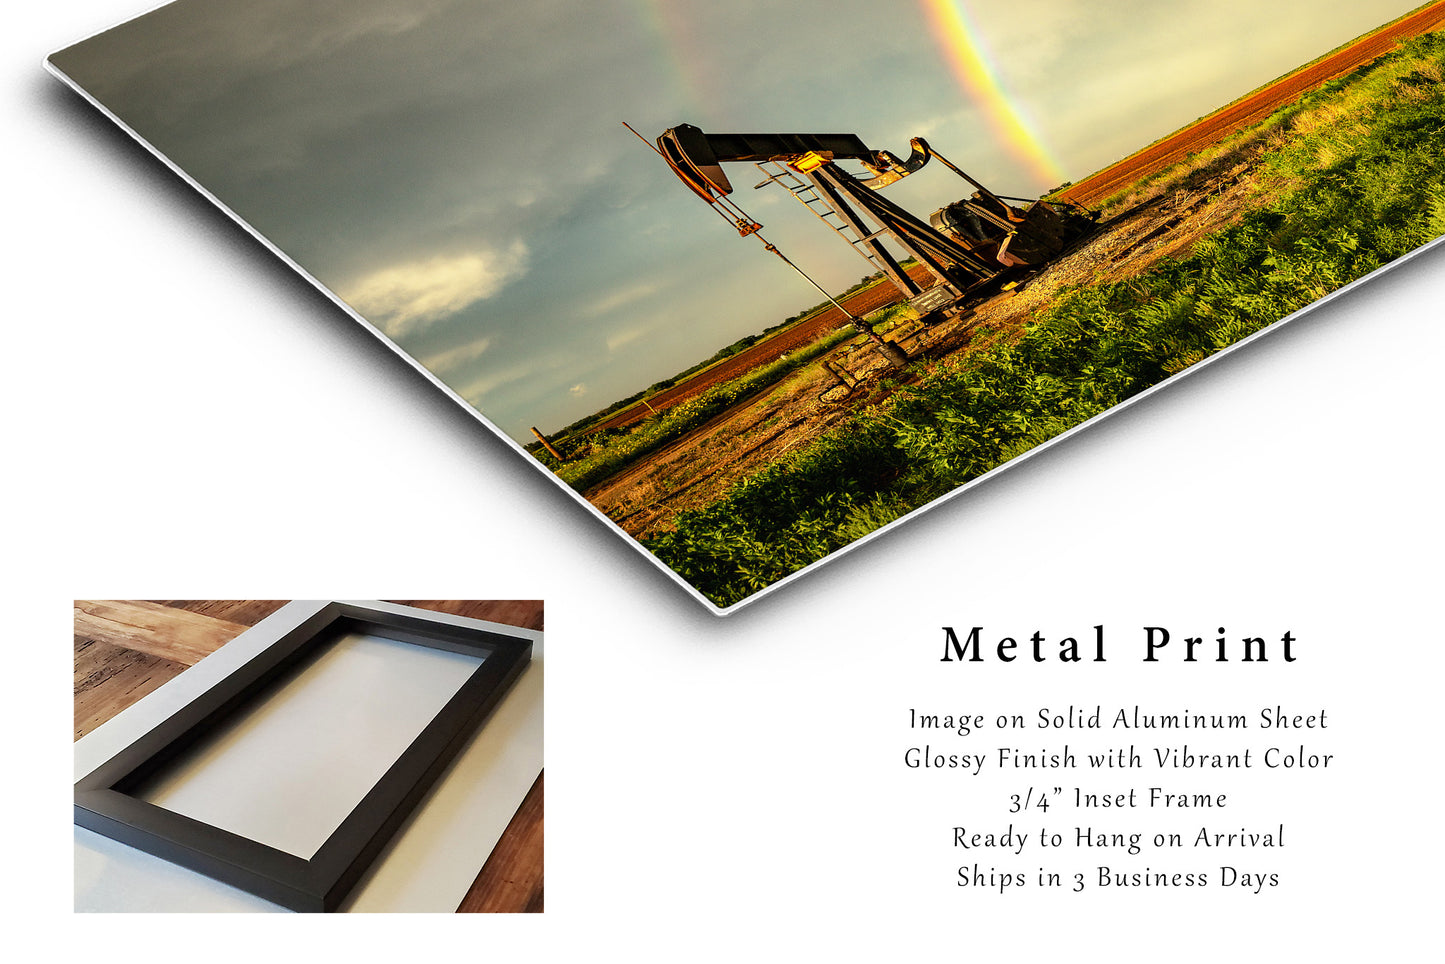 Oilfield Metal Print (Ready to Hang) Photo on Aluminum of Rainbow Ending at Pump Jack on Stormy Day in Texas Oil and Gas Wall Art Energy Decor